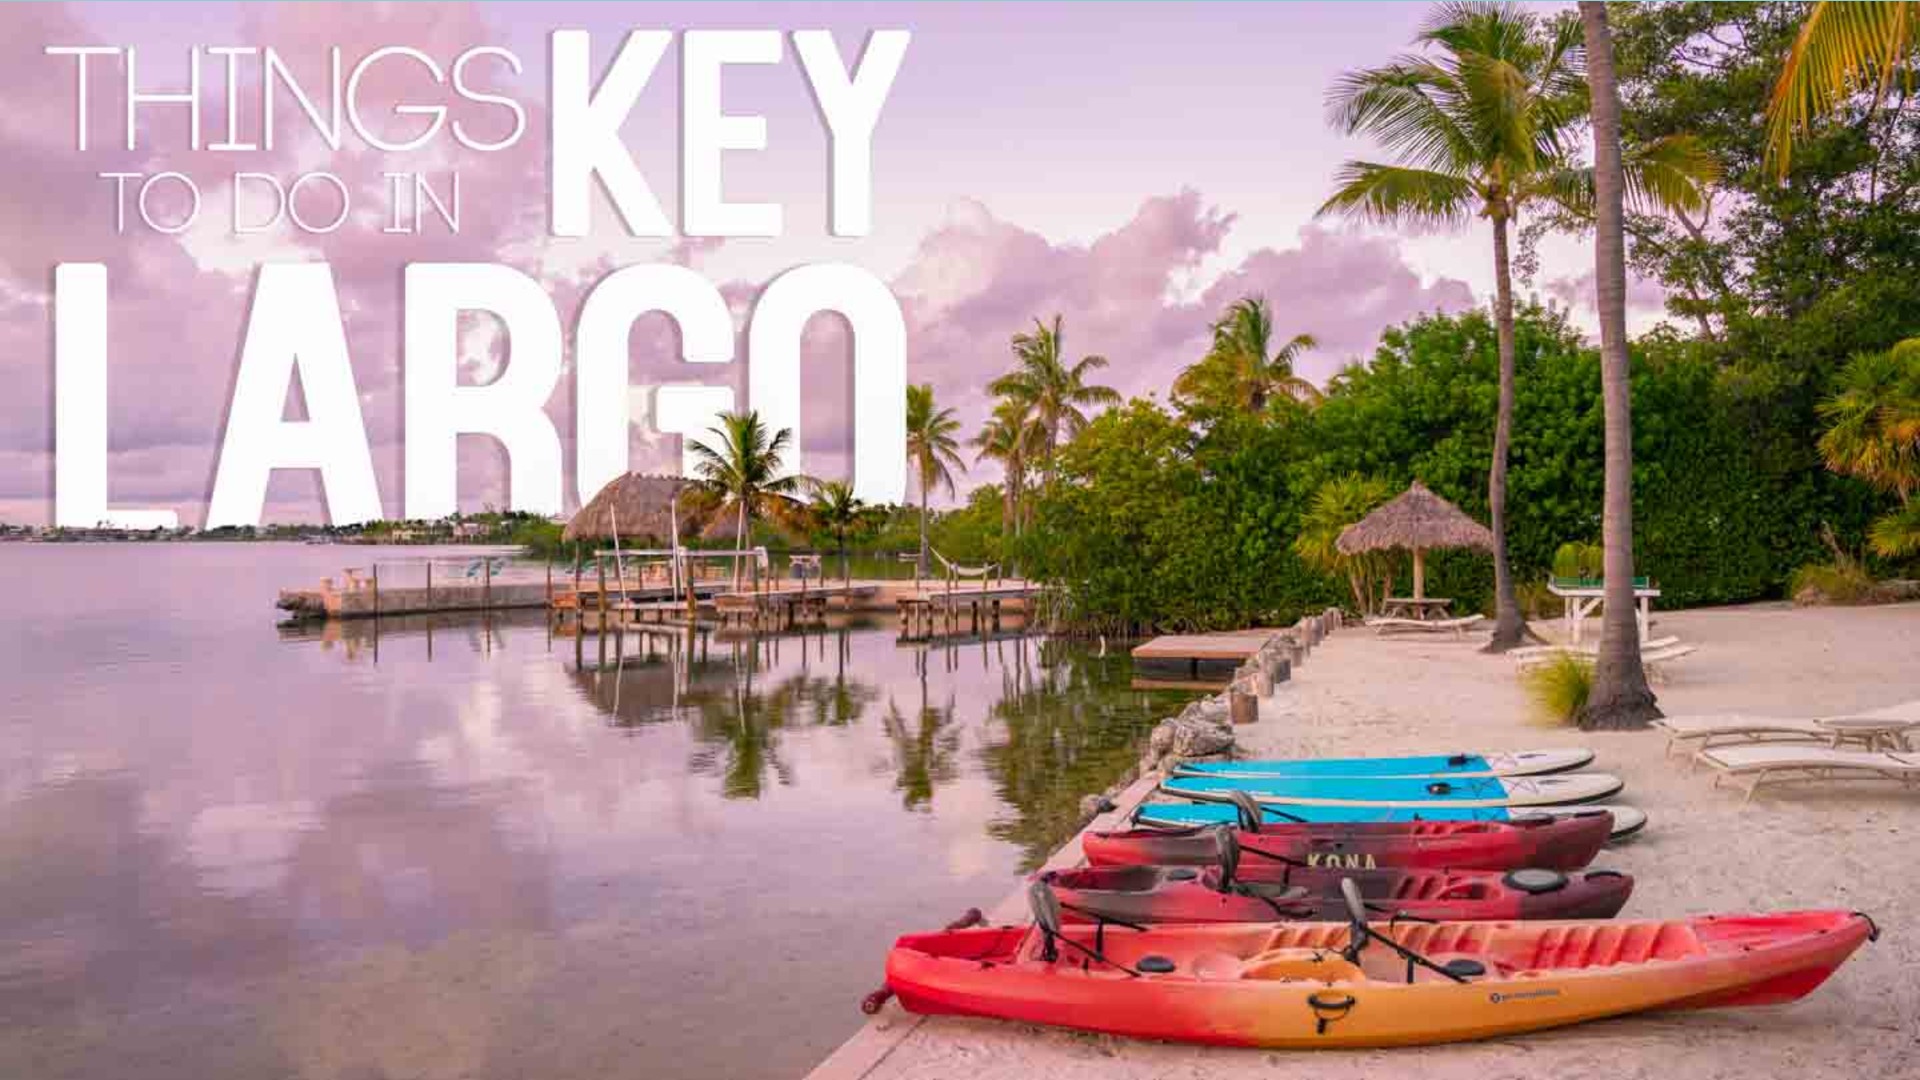 Top-Rated Attractions & Things to Do in Key Largo, FL